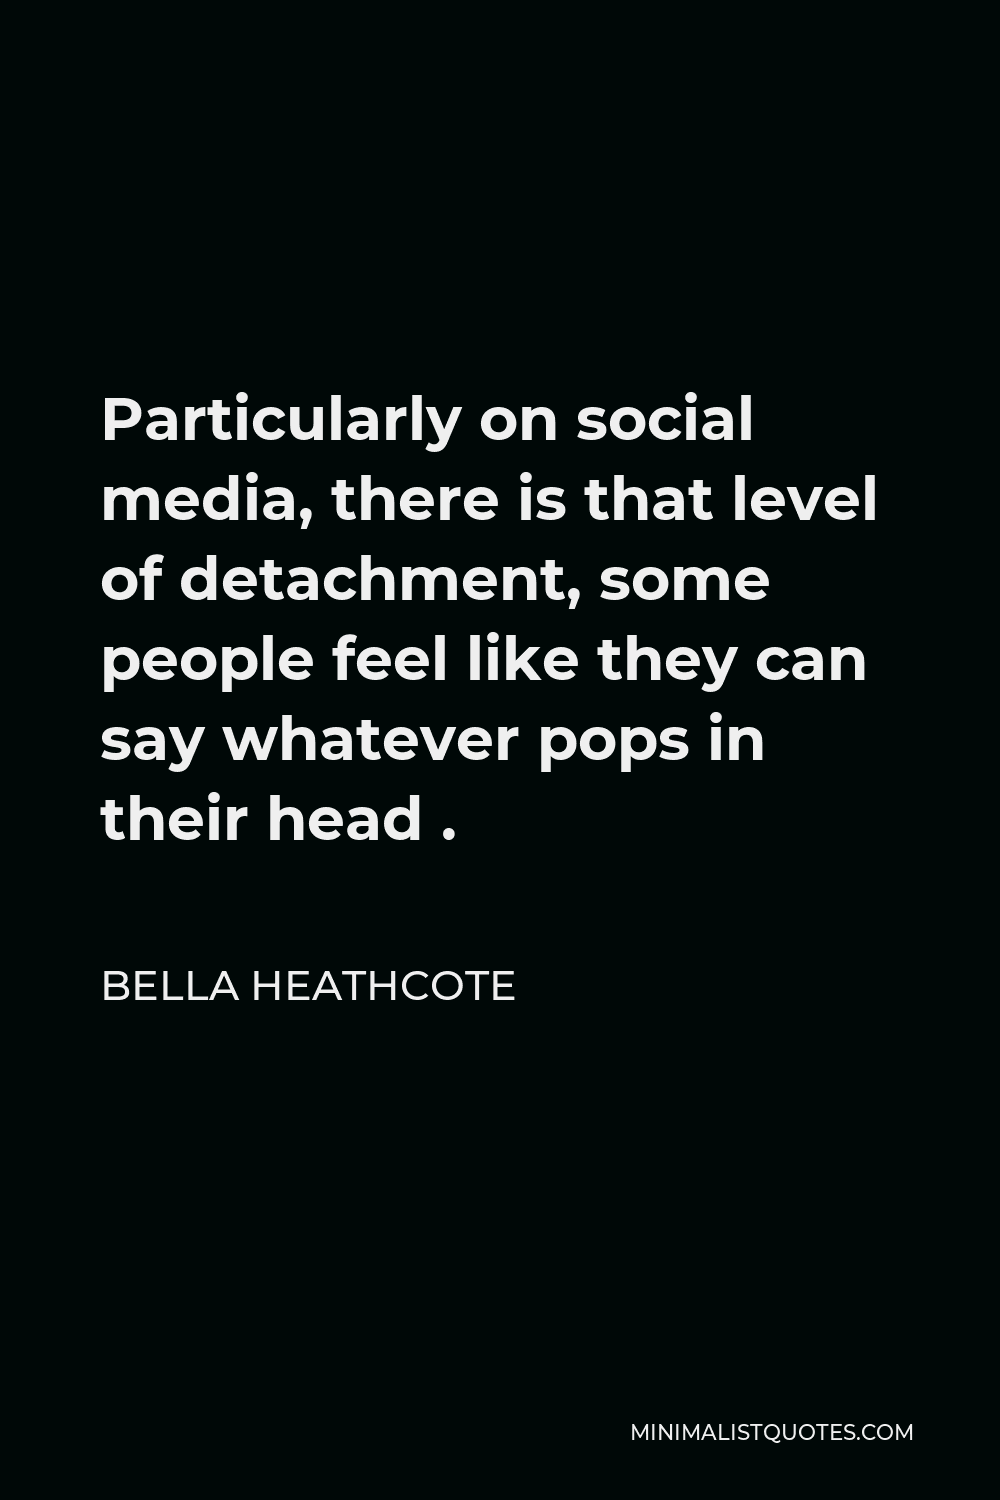 Bella Heathcote Quote - Particularly on social media, there is that level of detachment, some people feel like they can say whatever pops in their head .